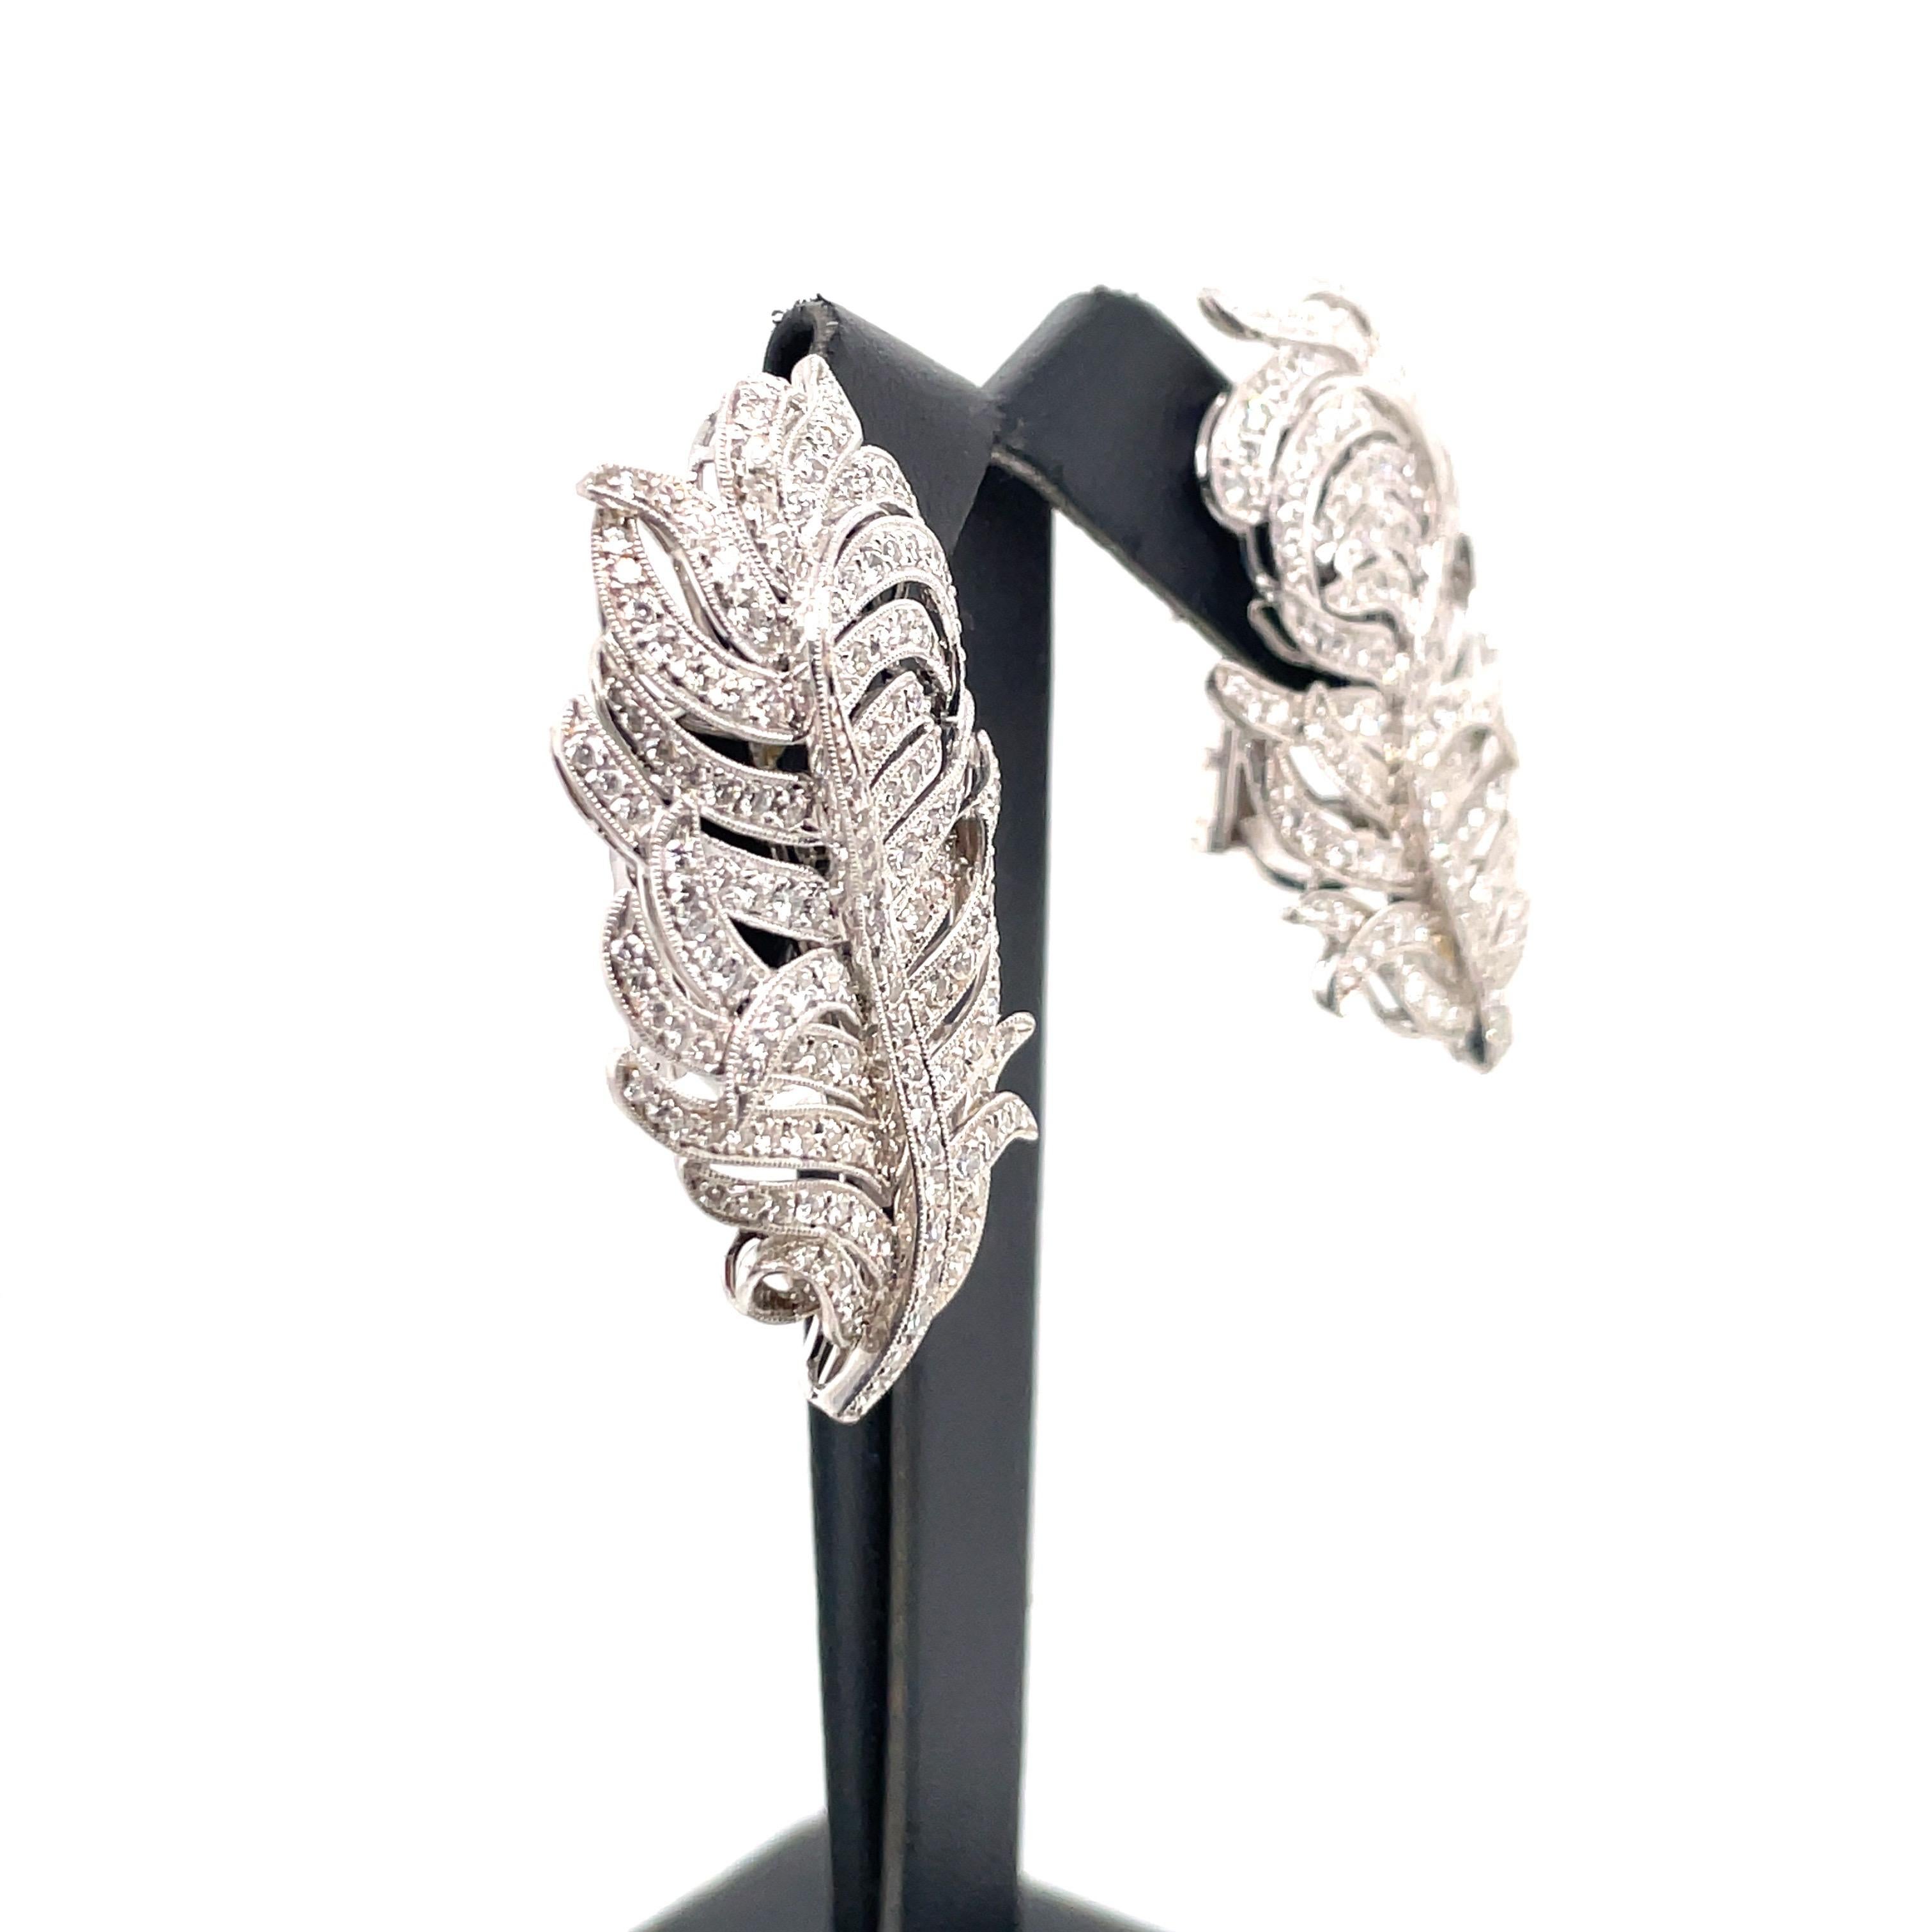 Harbor D. Diamond Floral Leaf Earrings 4 Carat 18 Karat White Gold In Excellent Condition For Sale In New York, NY